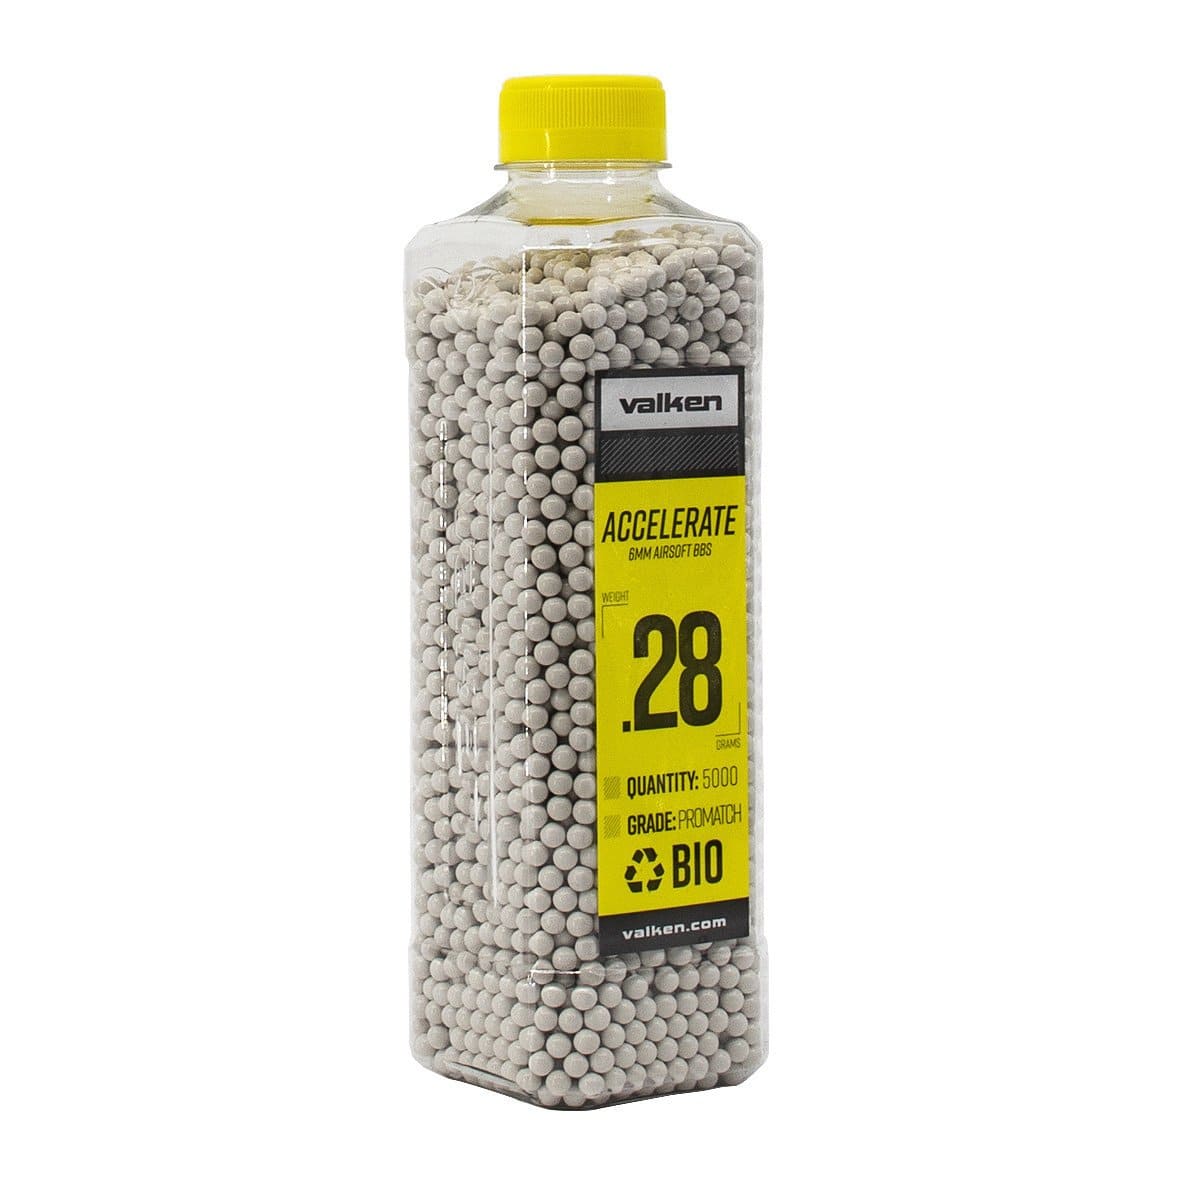 Valken Accelerate Airsoft BBs - 0.28G Bio -5000CT- White - Eminent Paintball And Airsoft